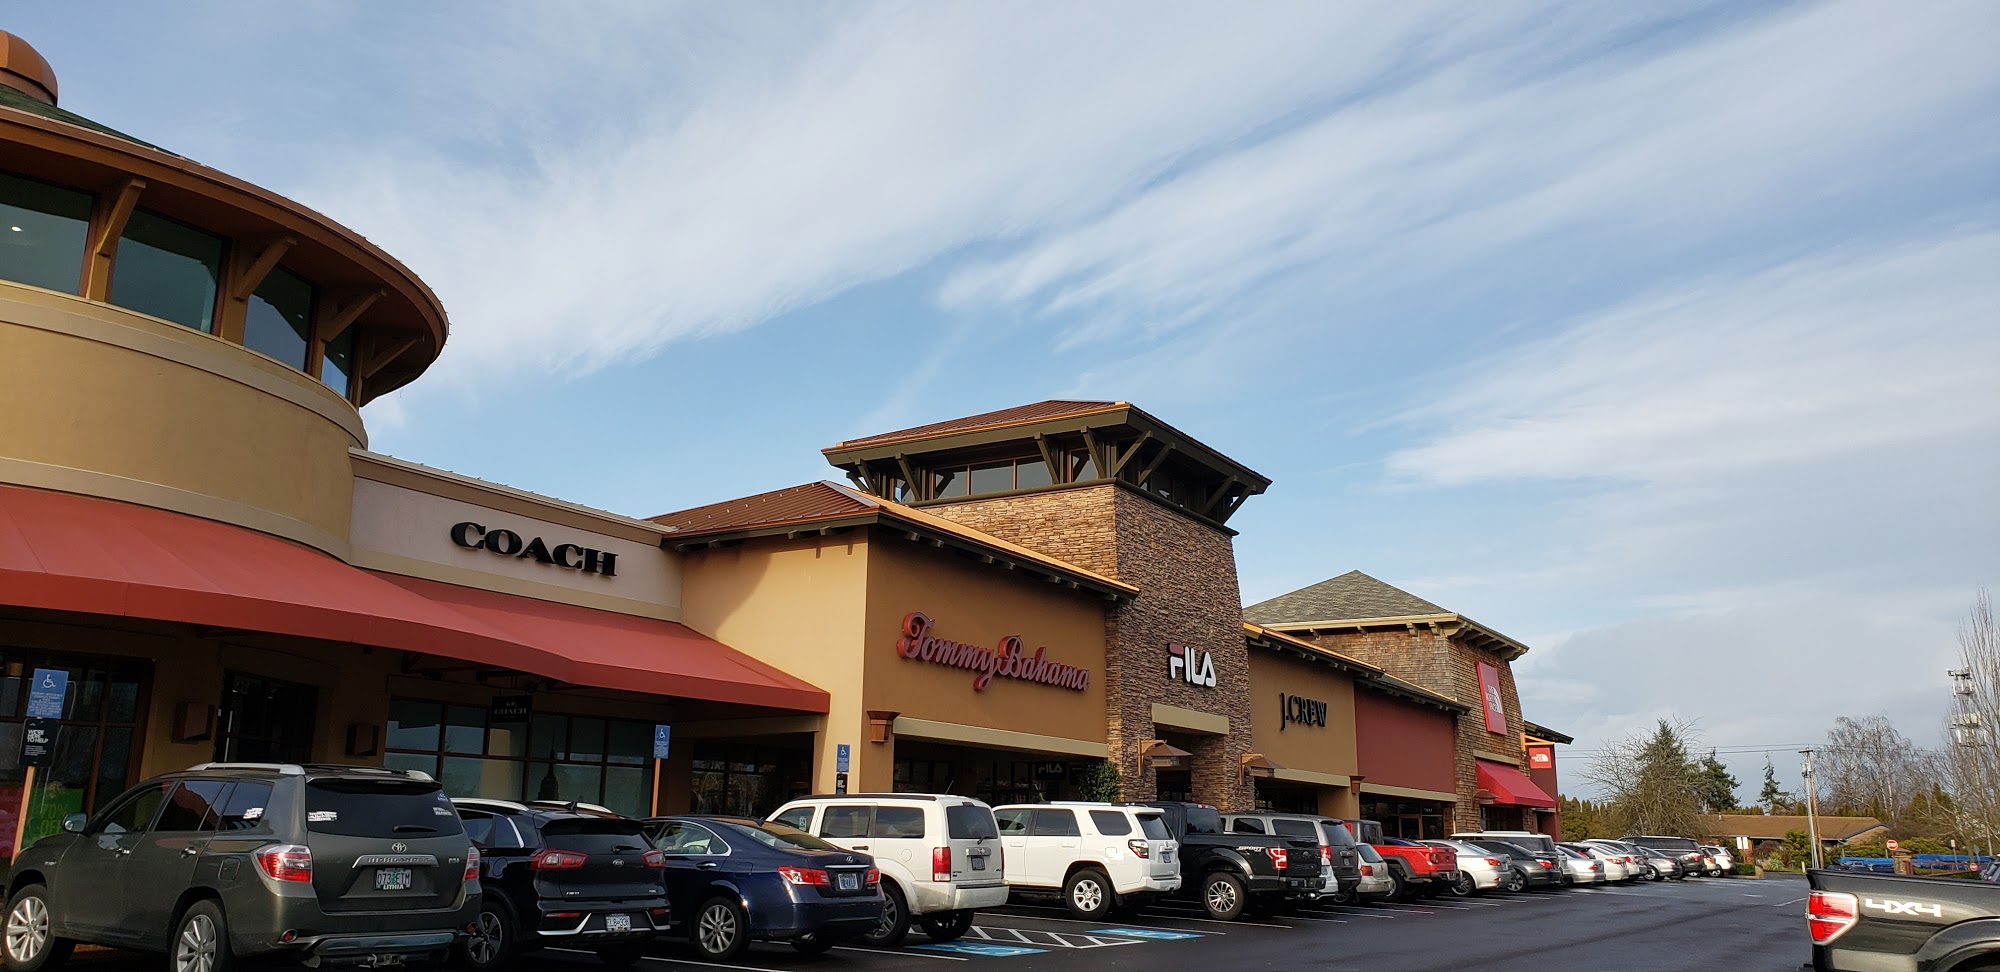 Tommy Bahama Outlet